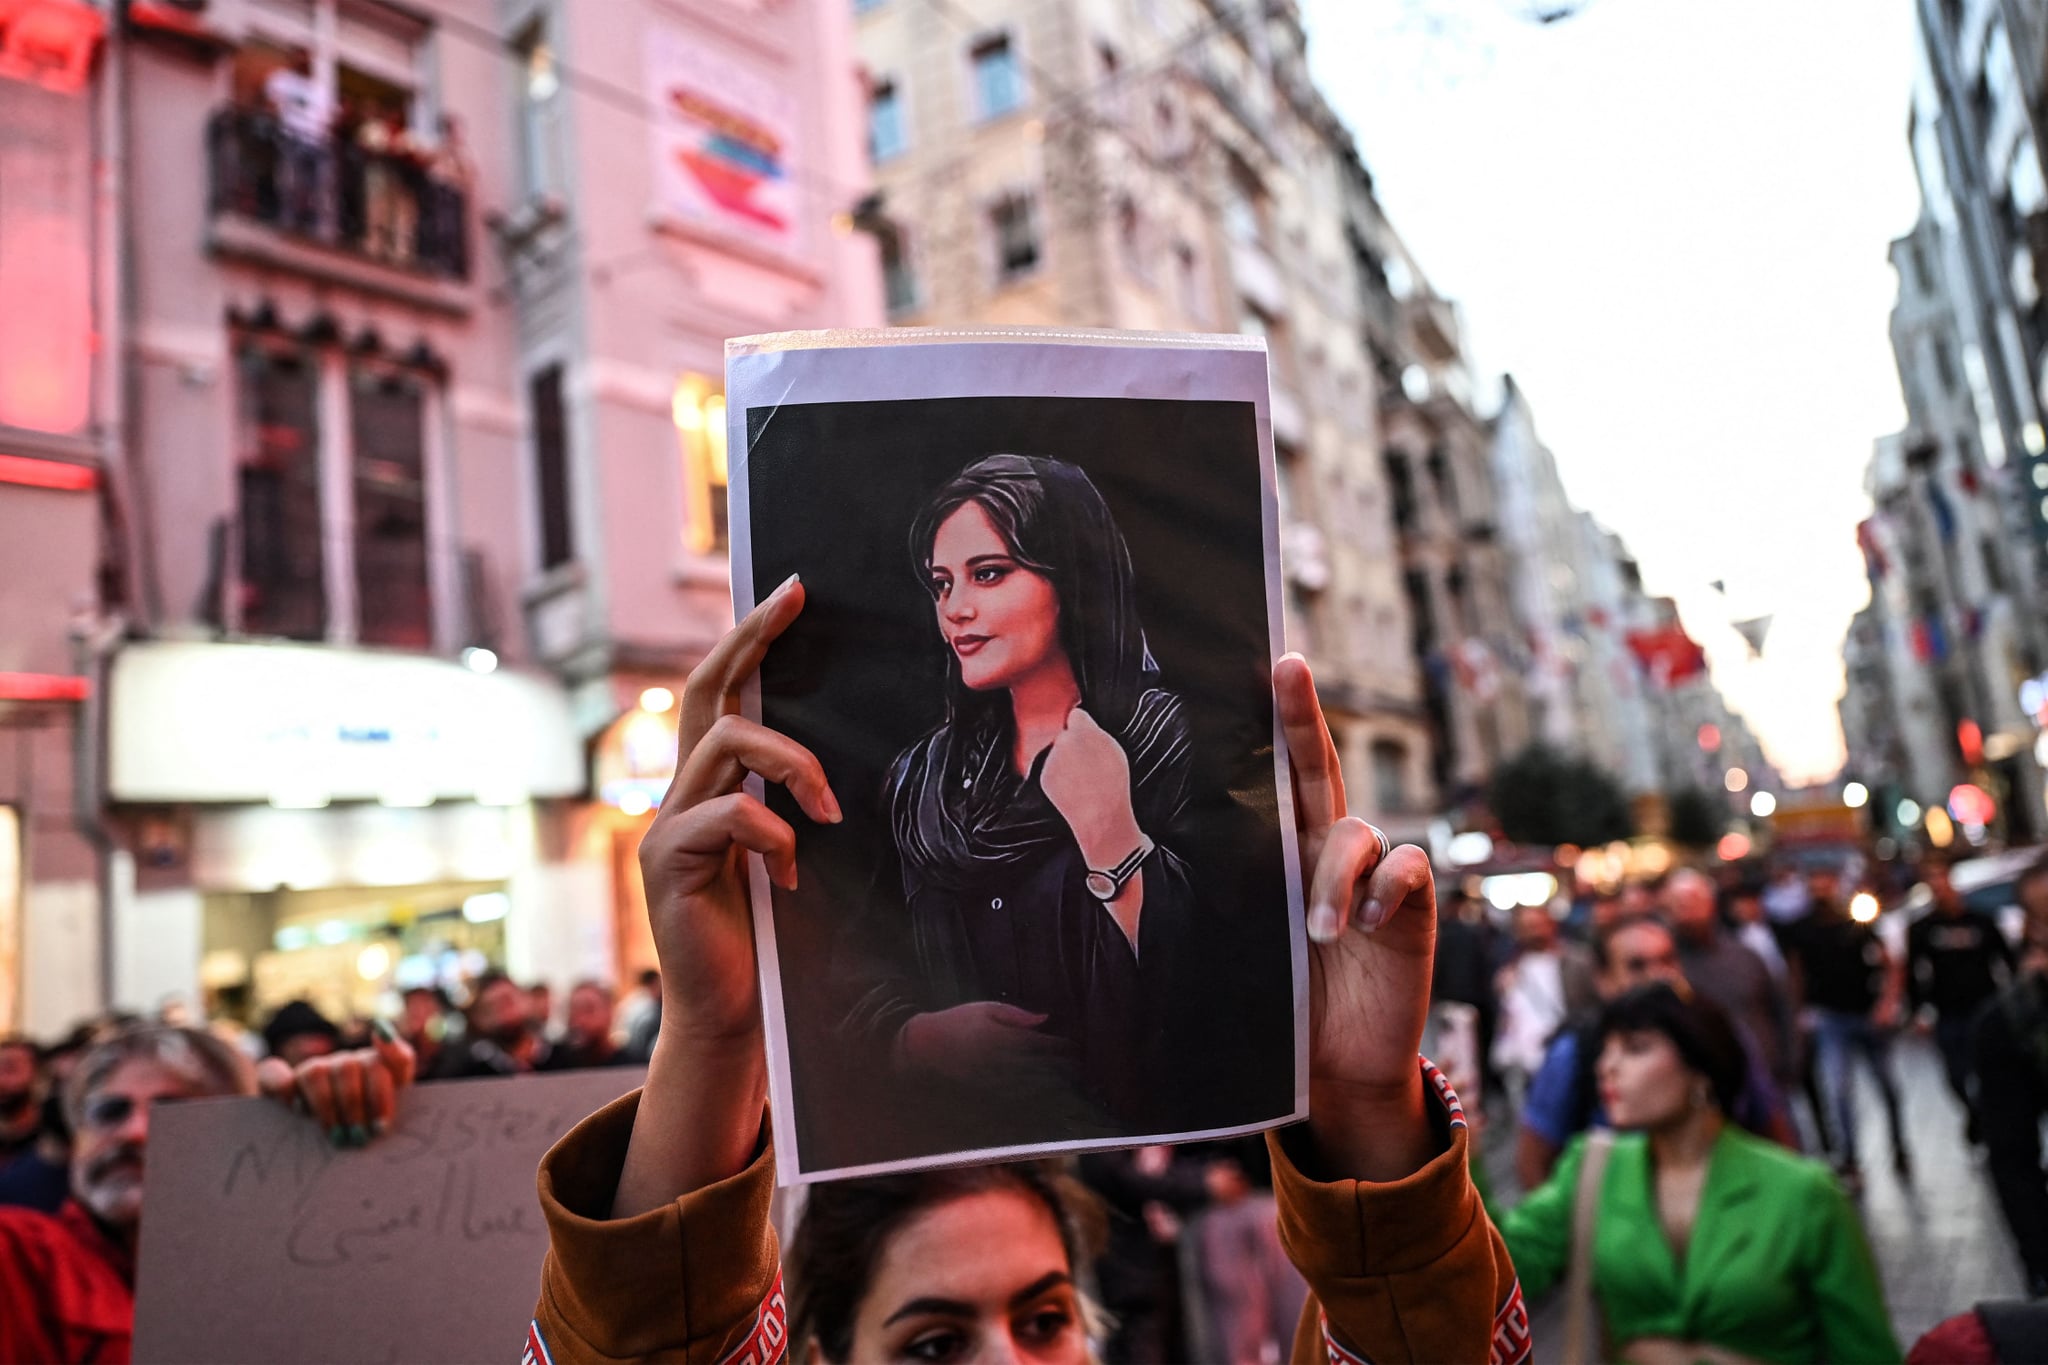 A protester holds a portrait of Mahsa Amini  during a demonstration in support of Amini, a young Iranian woman who died after being arrested in Tehran by the Islamic Republic's morality police, on Istiklal avenue in Istanbul on September 20, 2022. - Amini, 22, was on a visit with her family to the Iranian capital when she was detained on September 13 by the police unit responsible for enforcing Iran's strict dress code for women, including the wearing of the headscarf in public. She was declared dead on September 16 by state television after having spent three days in a coma. (Photo by Ozan KOSE / AFP) (Photo by OZAN KOSE/AFP via Getty Images)